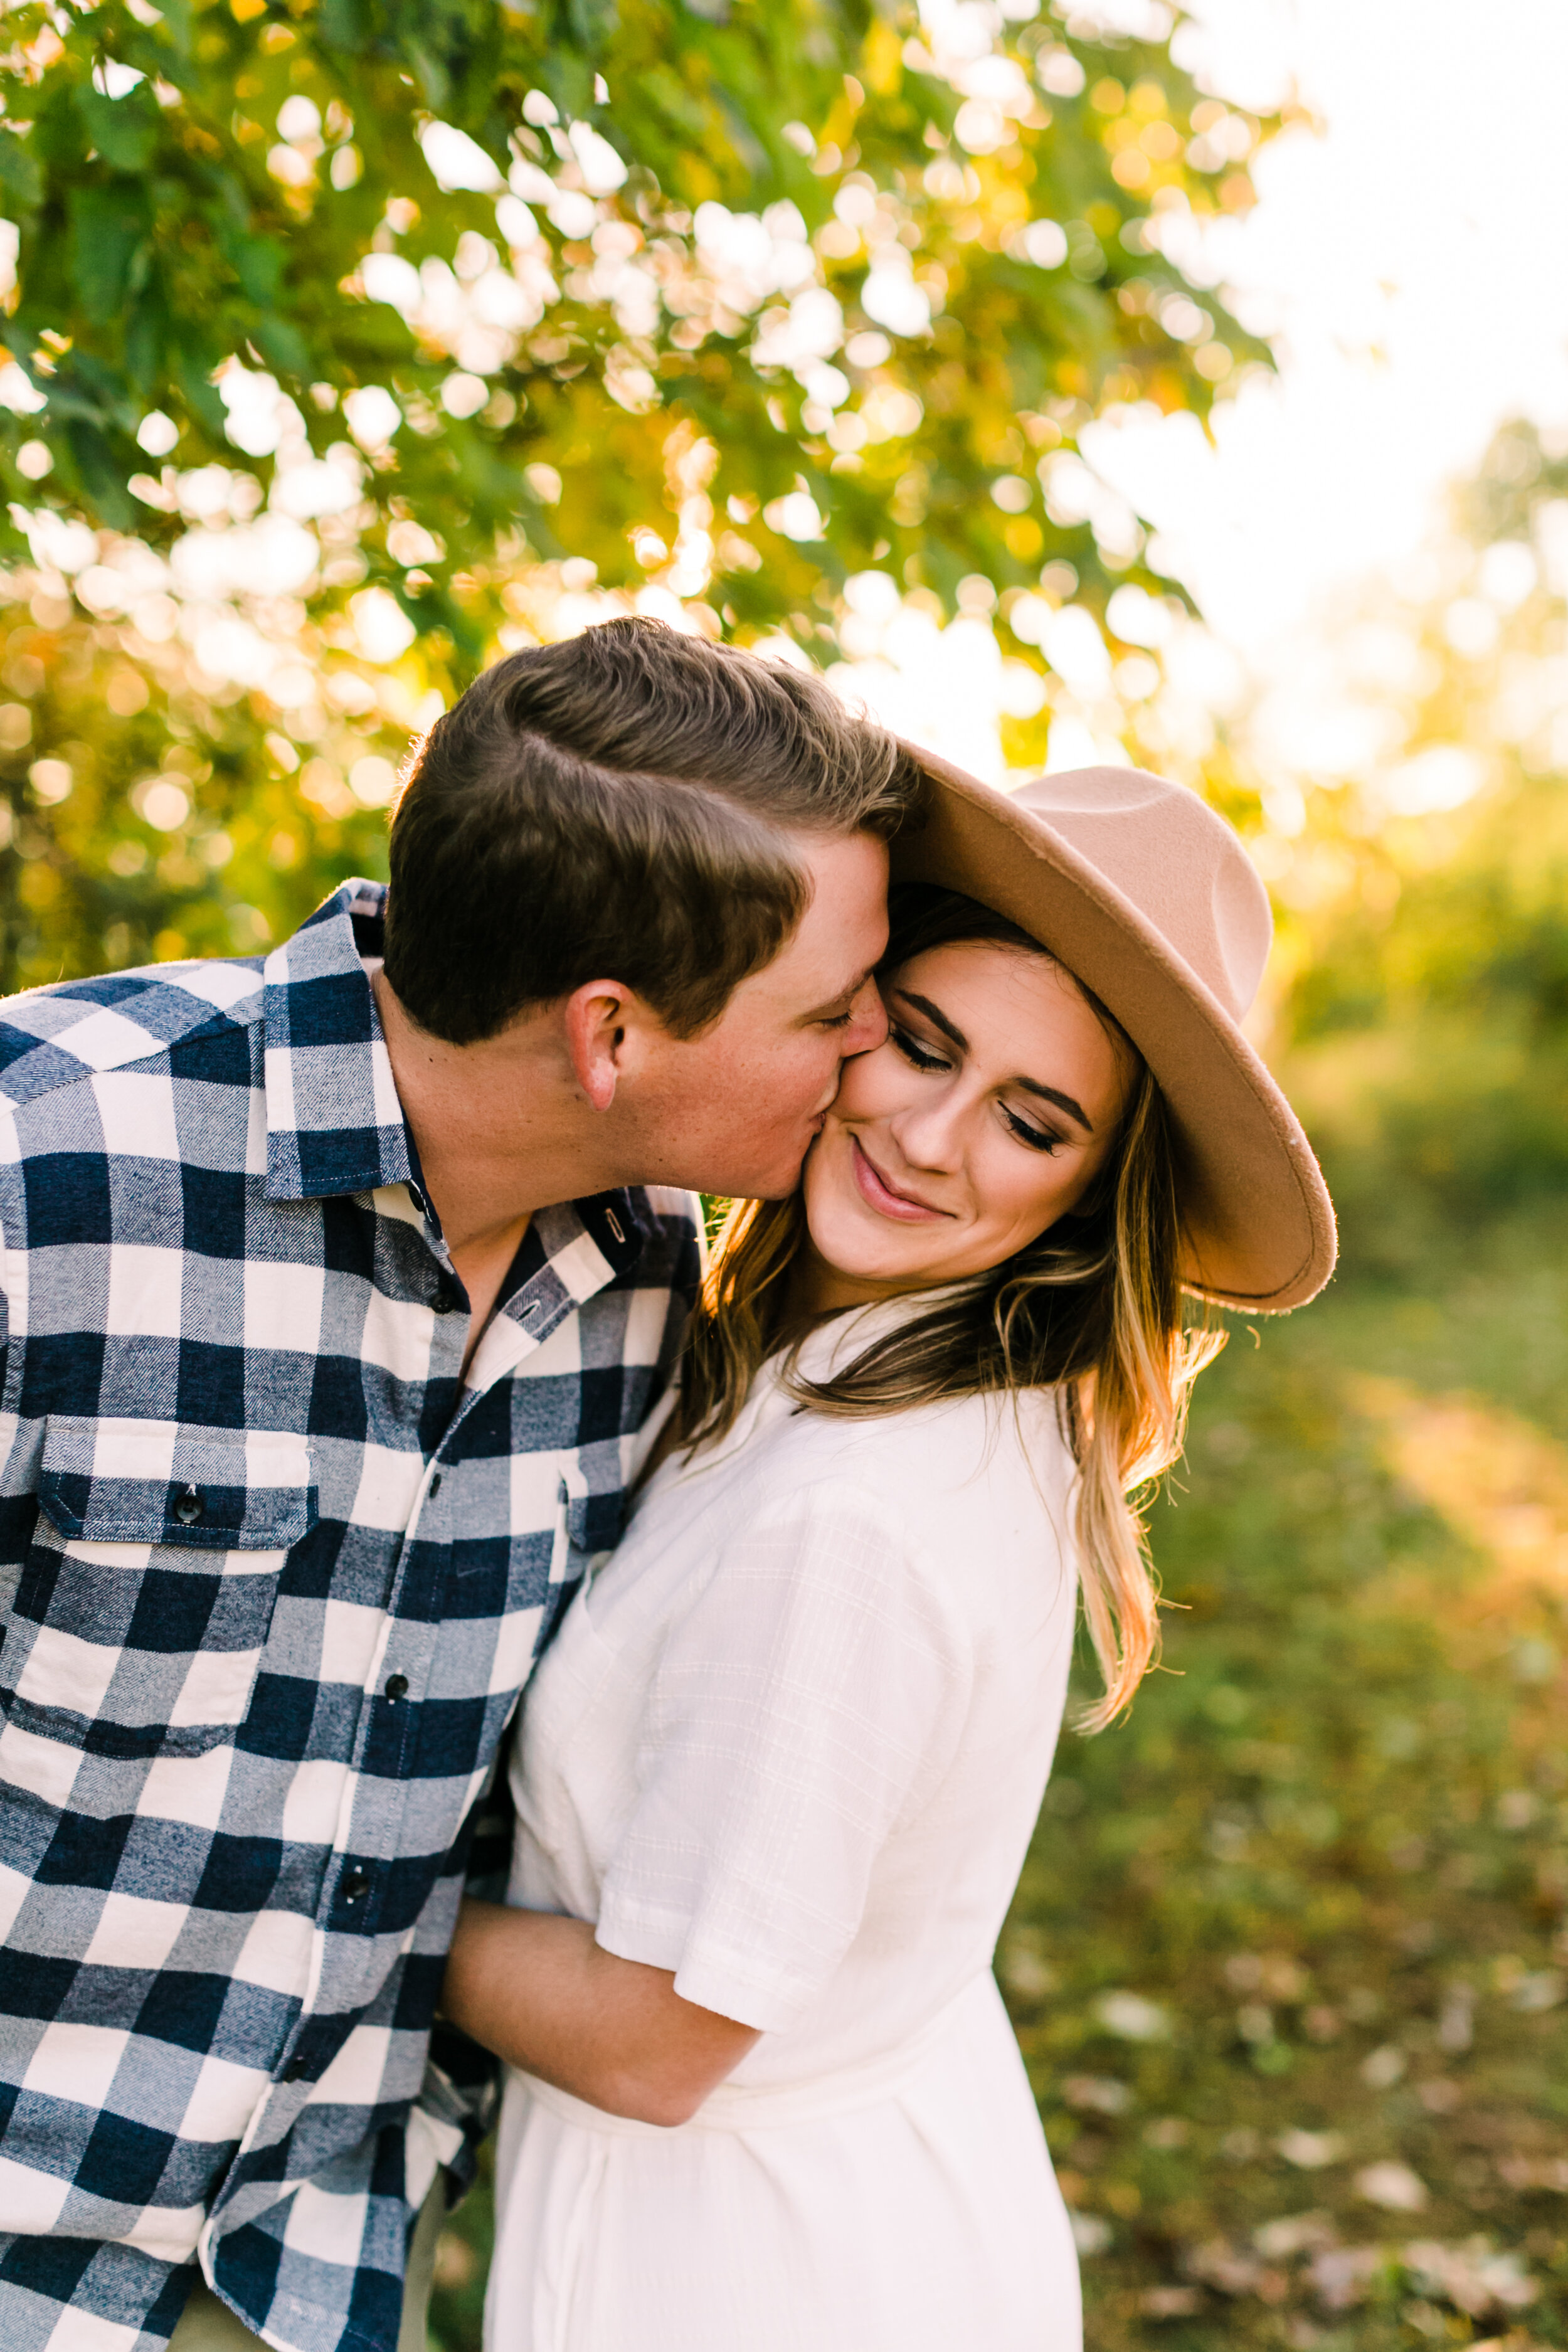 Tennessee+Fall+Engagement+Photos+Puppy (49 of 63).jpg